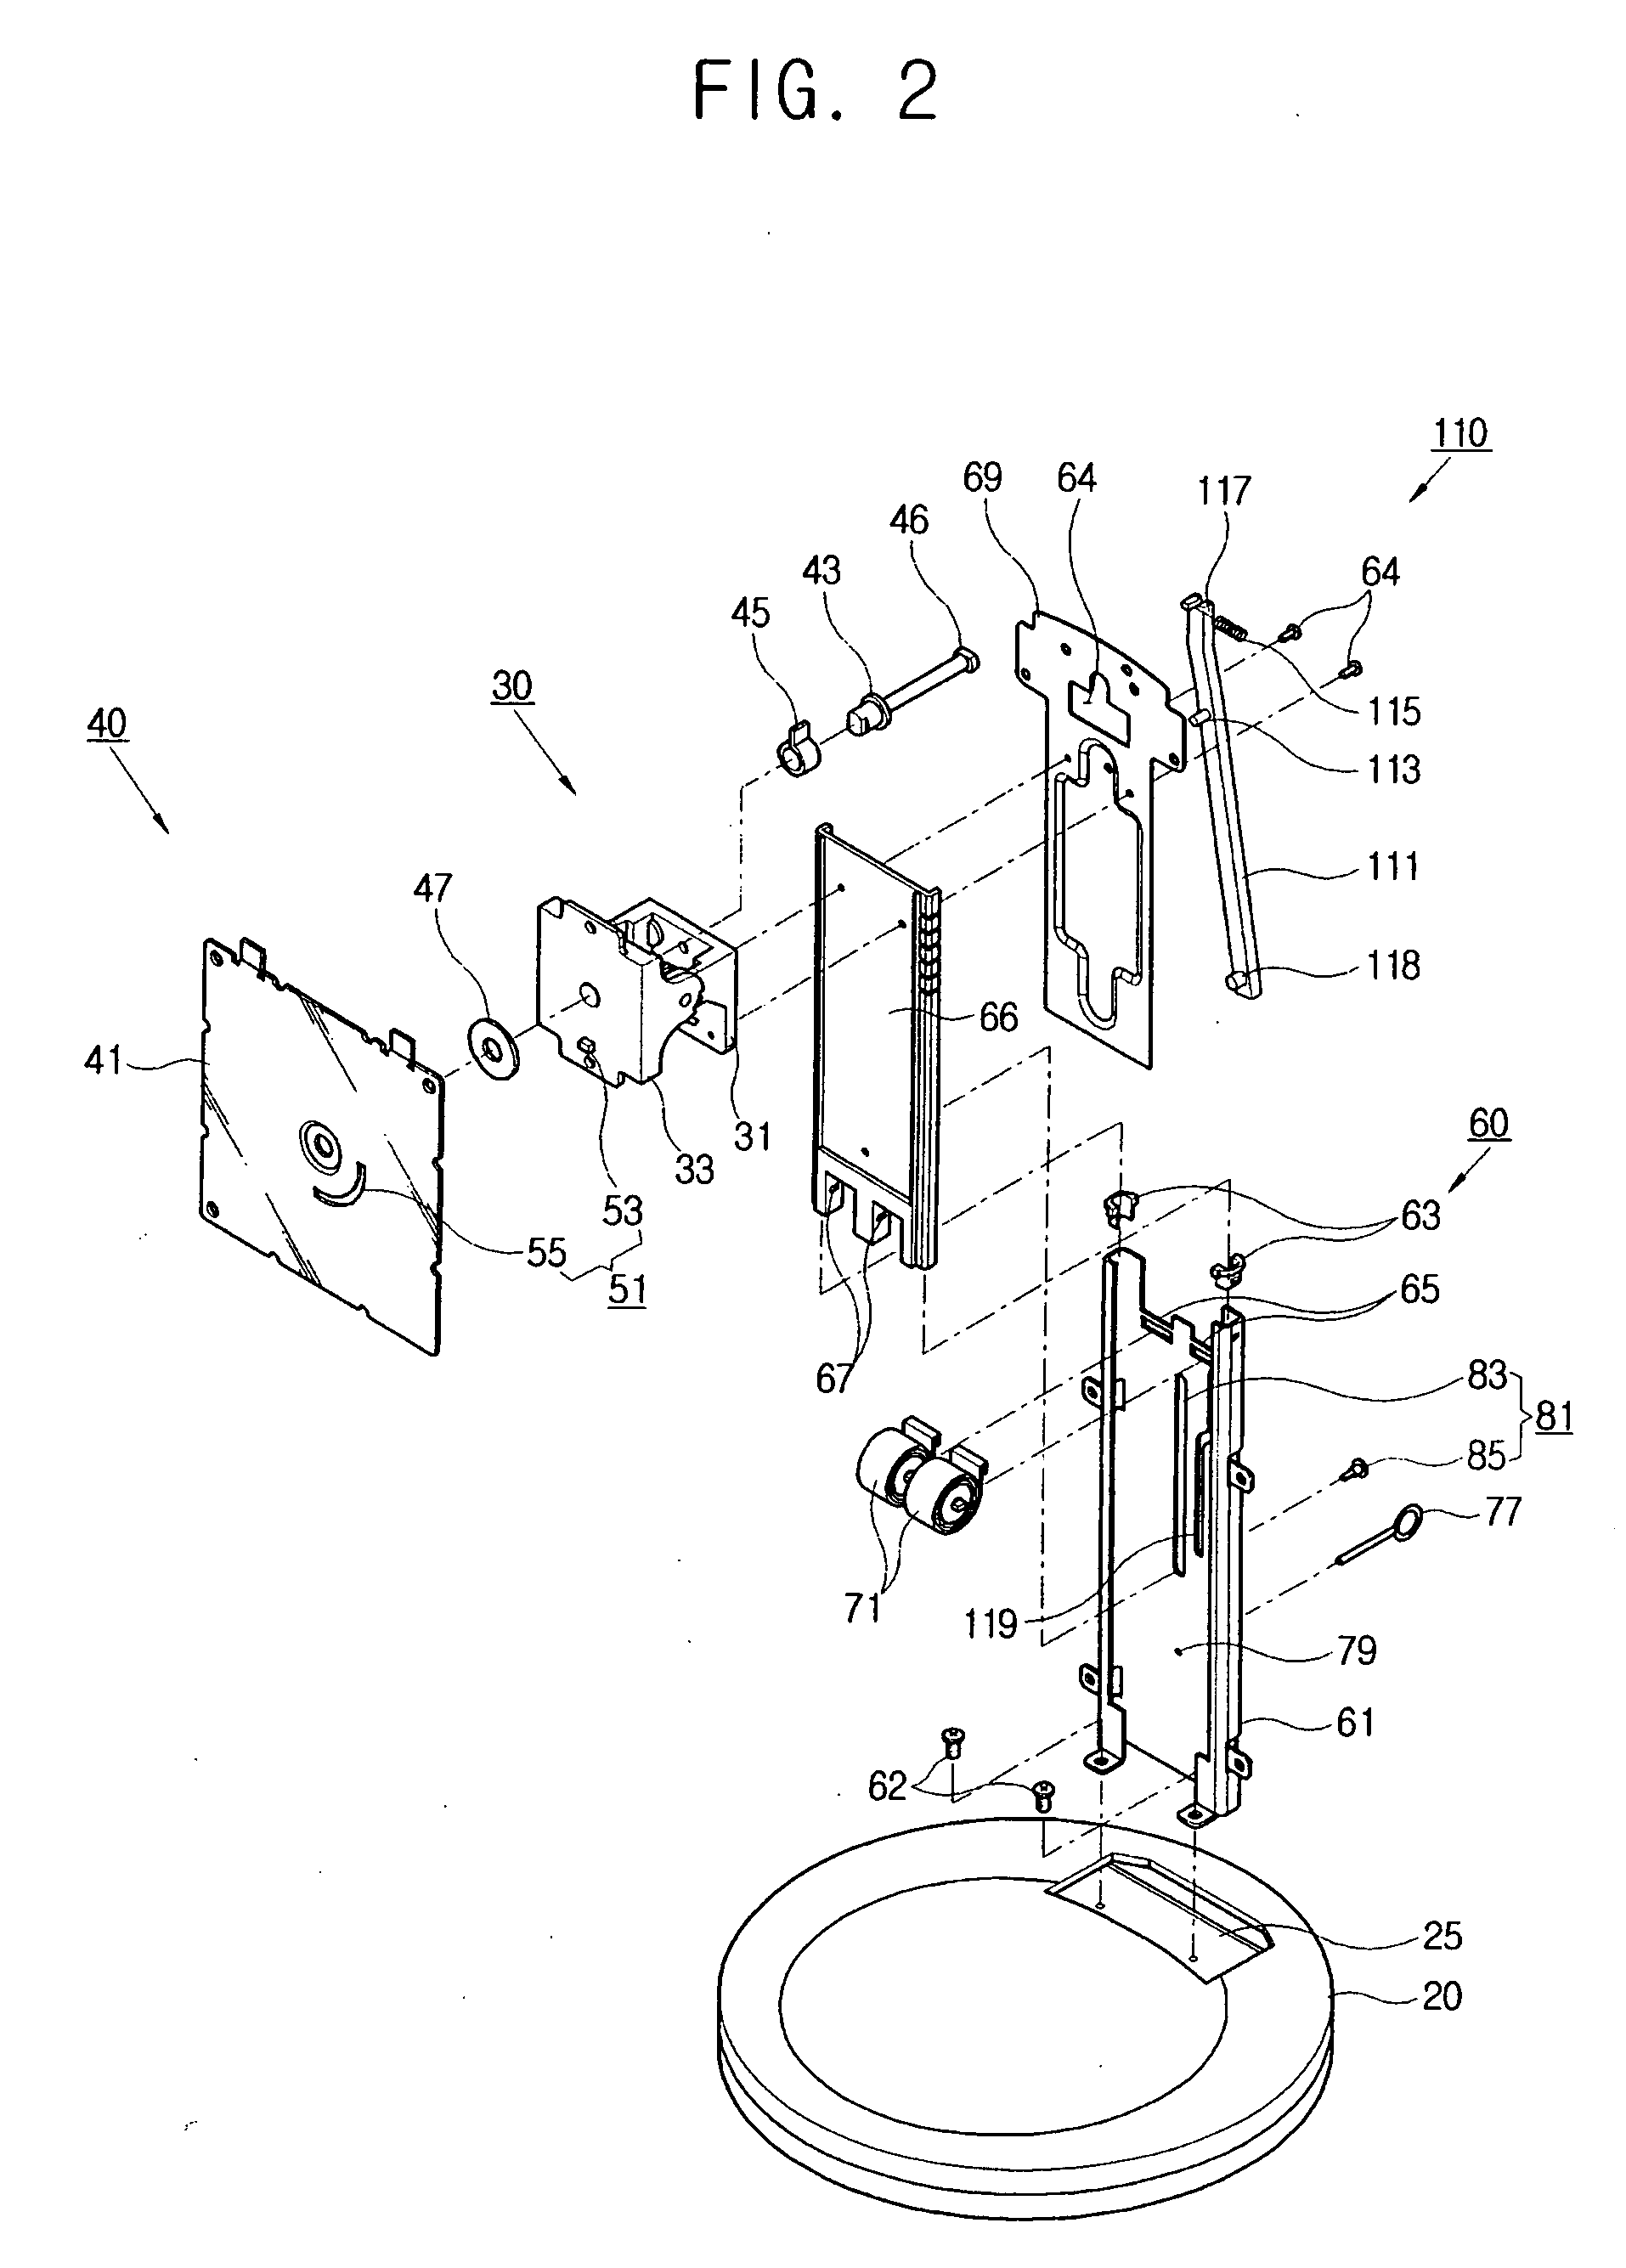 Stand and display apparatus having the same